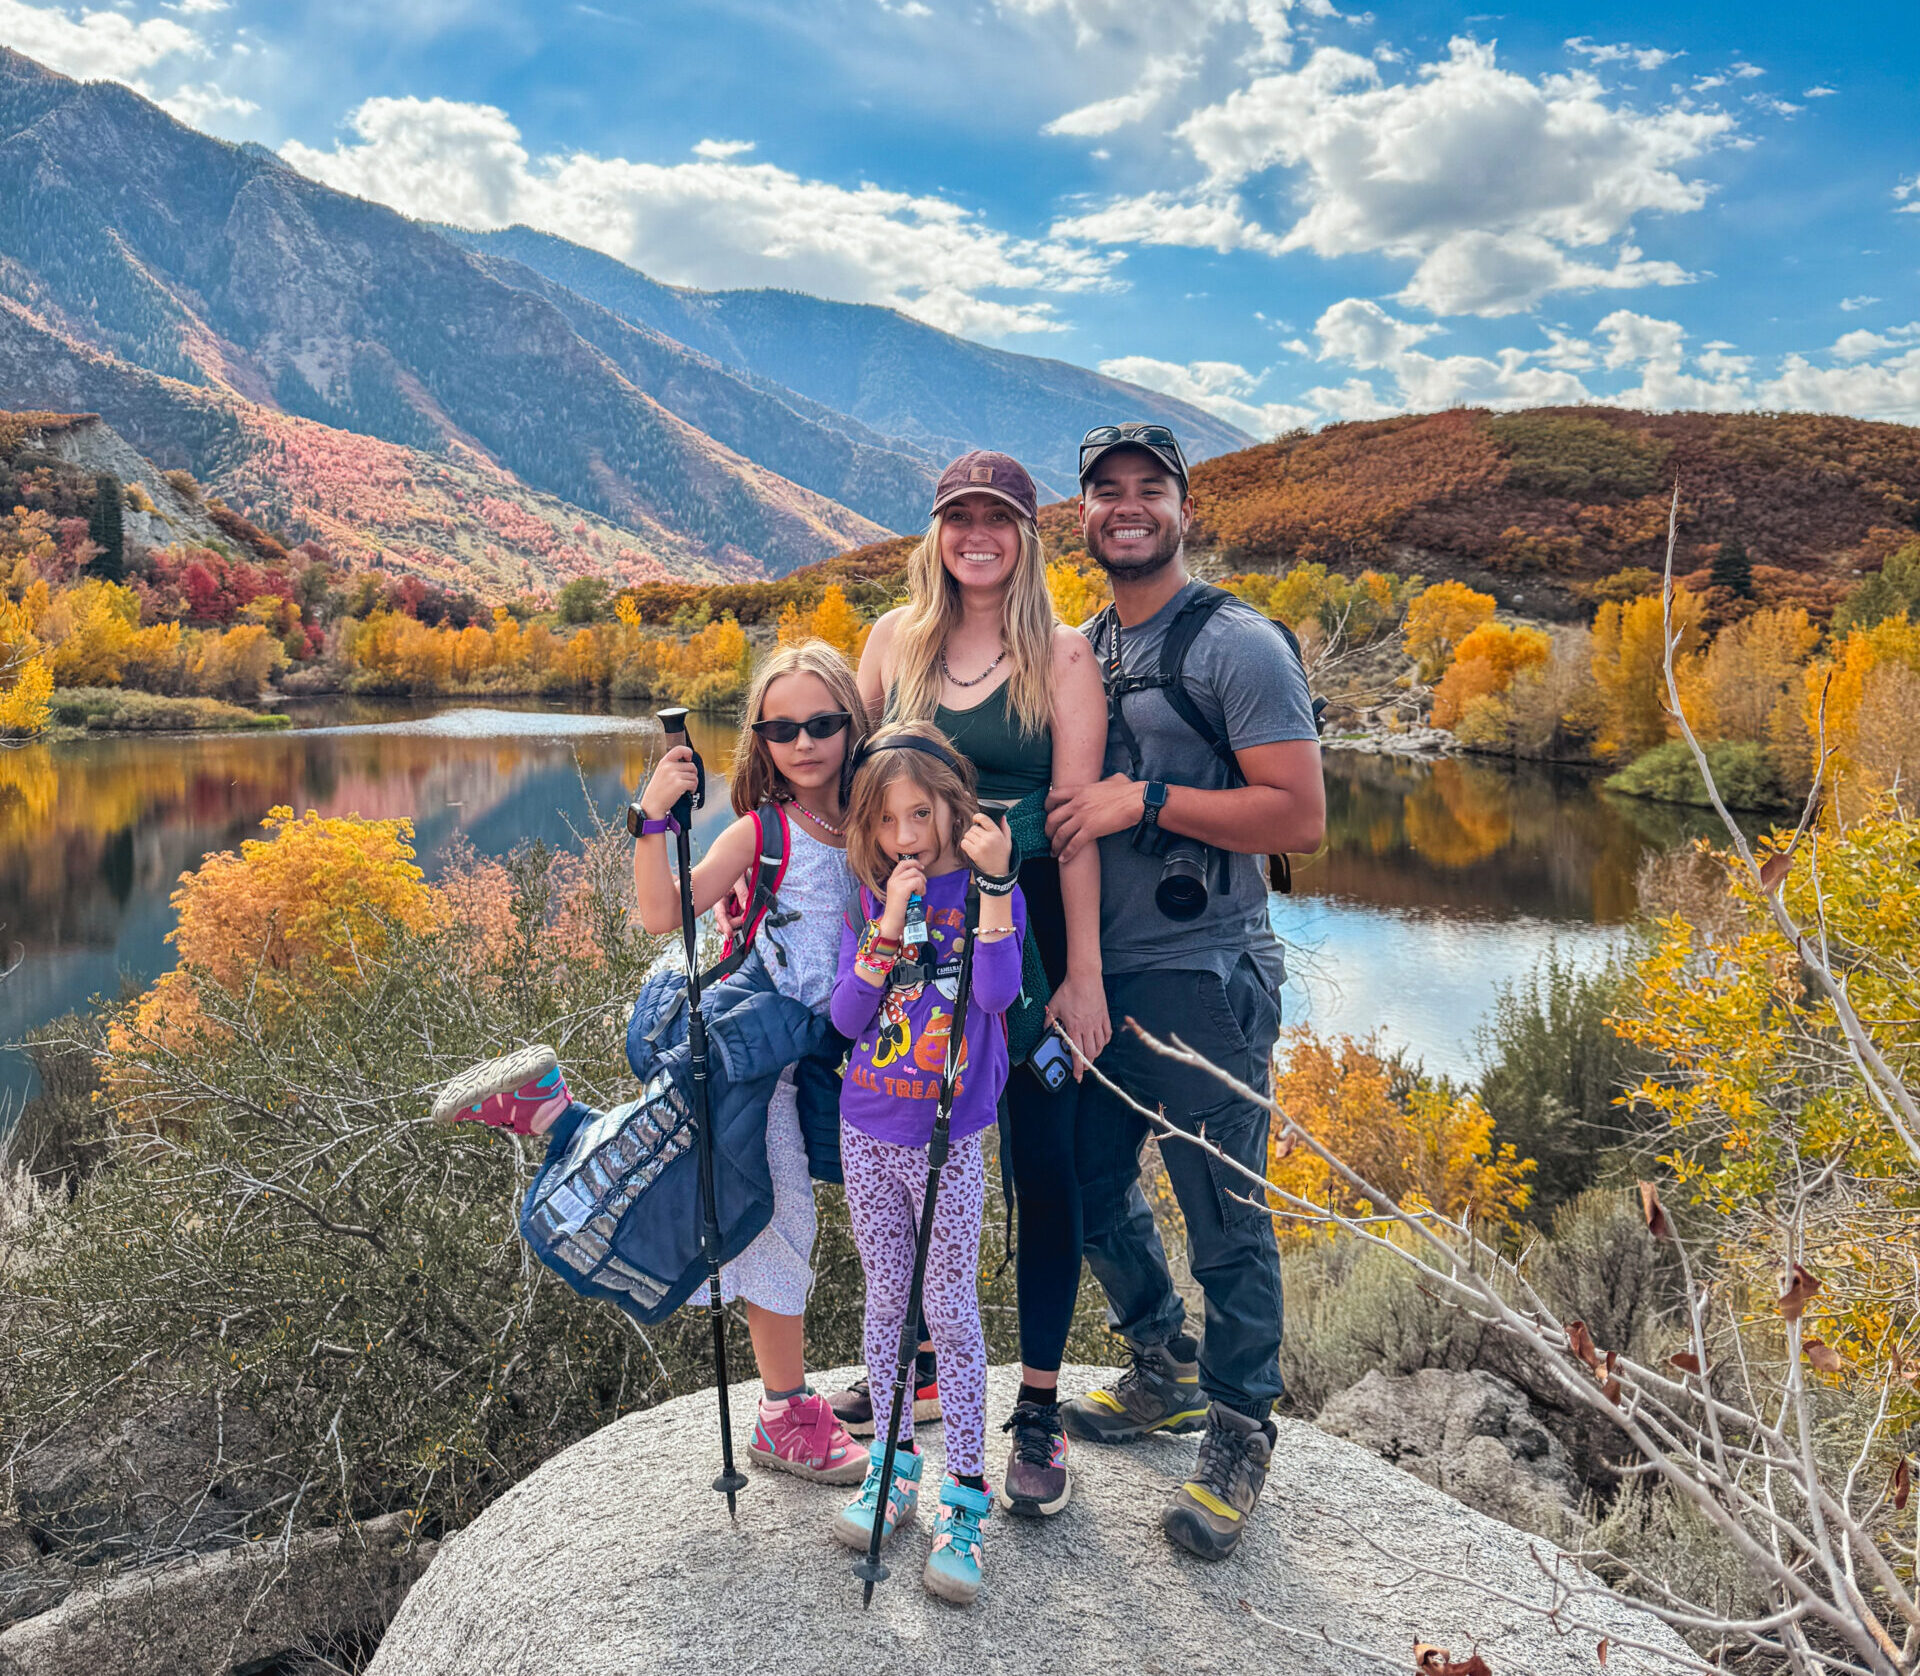 Roaming Together: Blended Family Connected by Travel